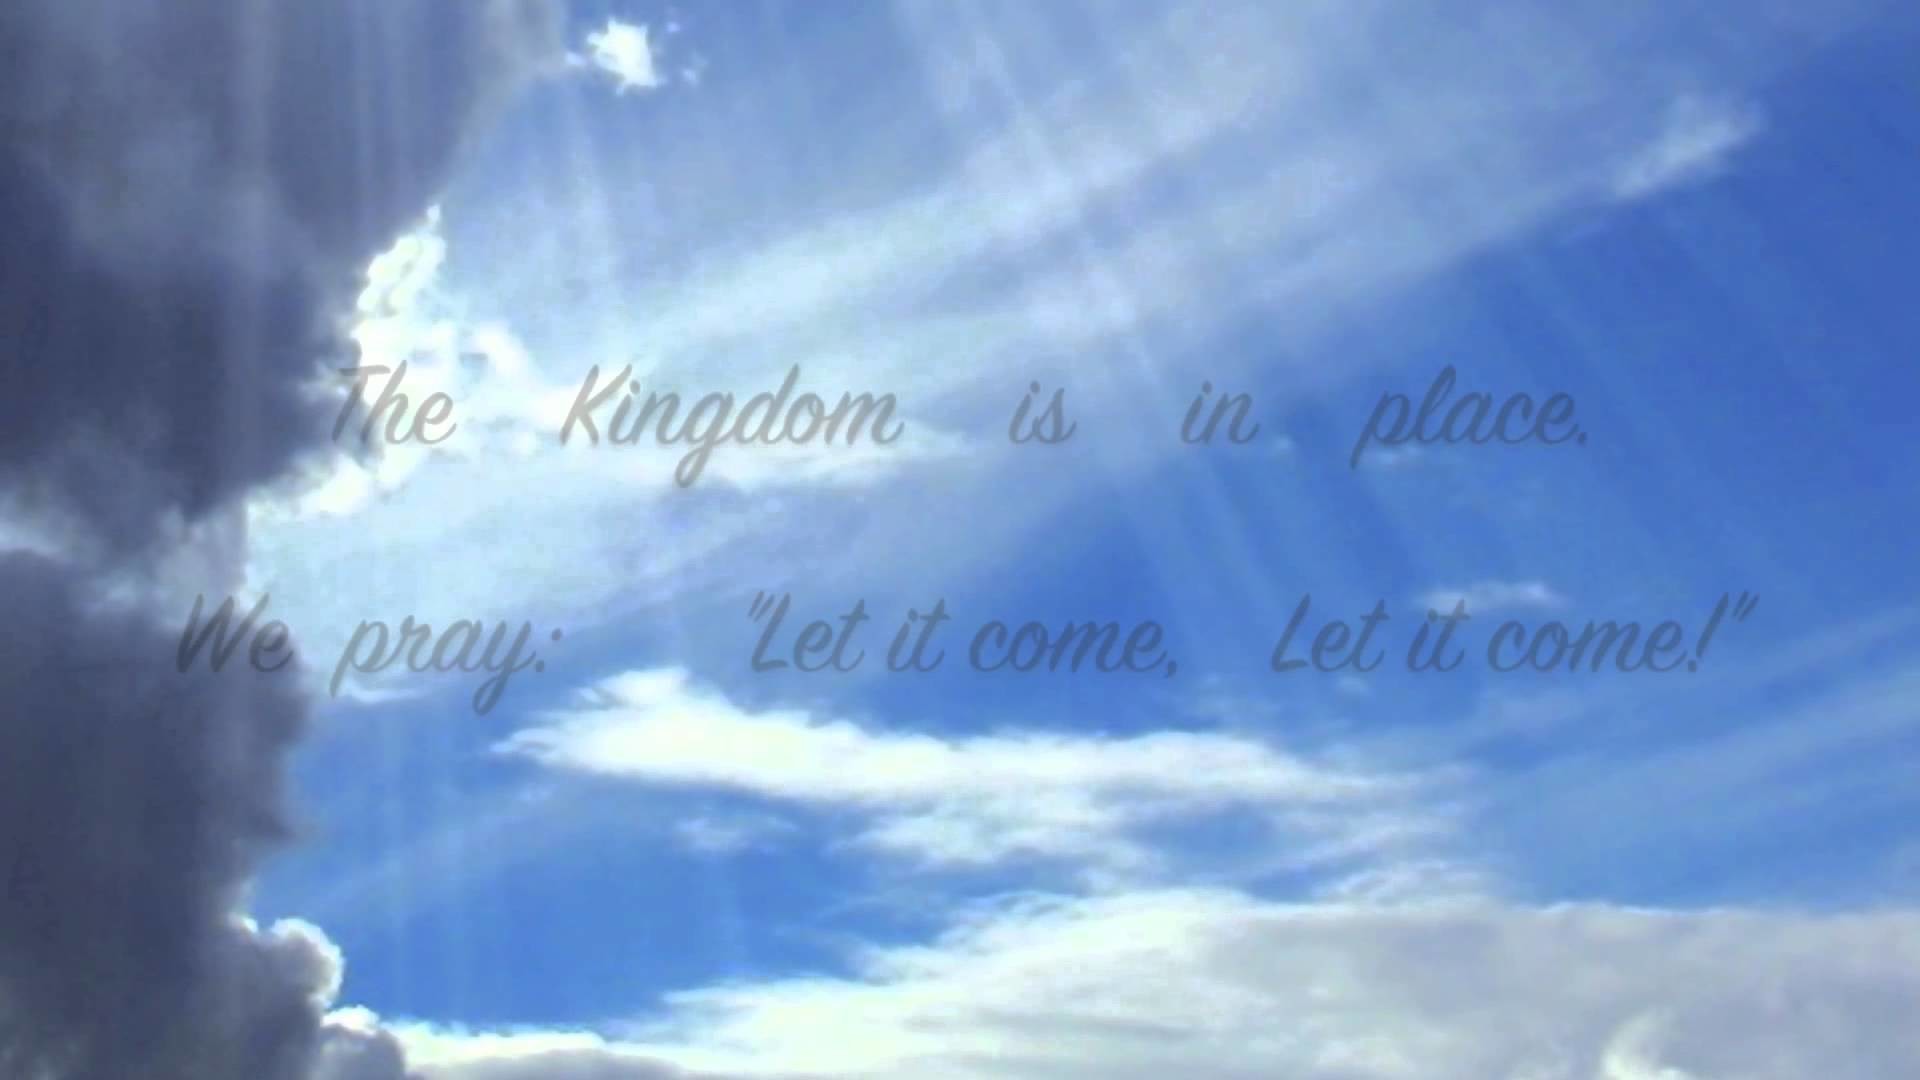 New Kingdom Song 136 Jehovahs Witnesses with Lyrics The Kingdom is in Place – Let it Come